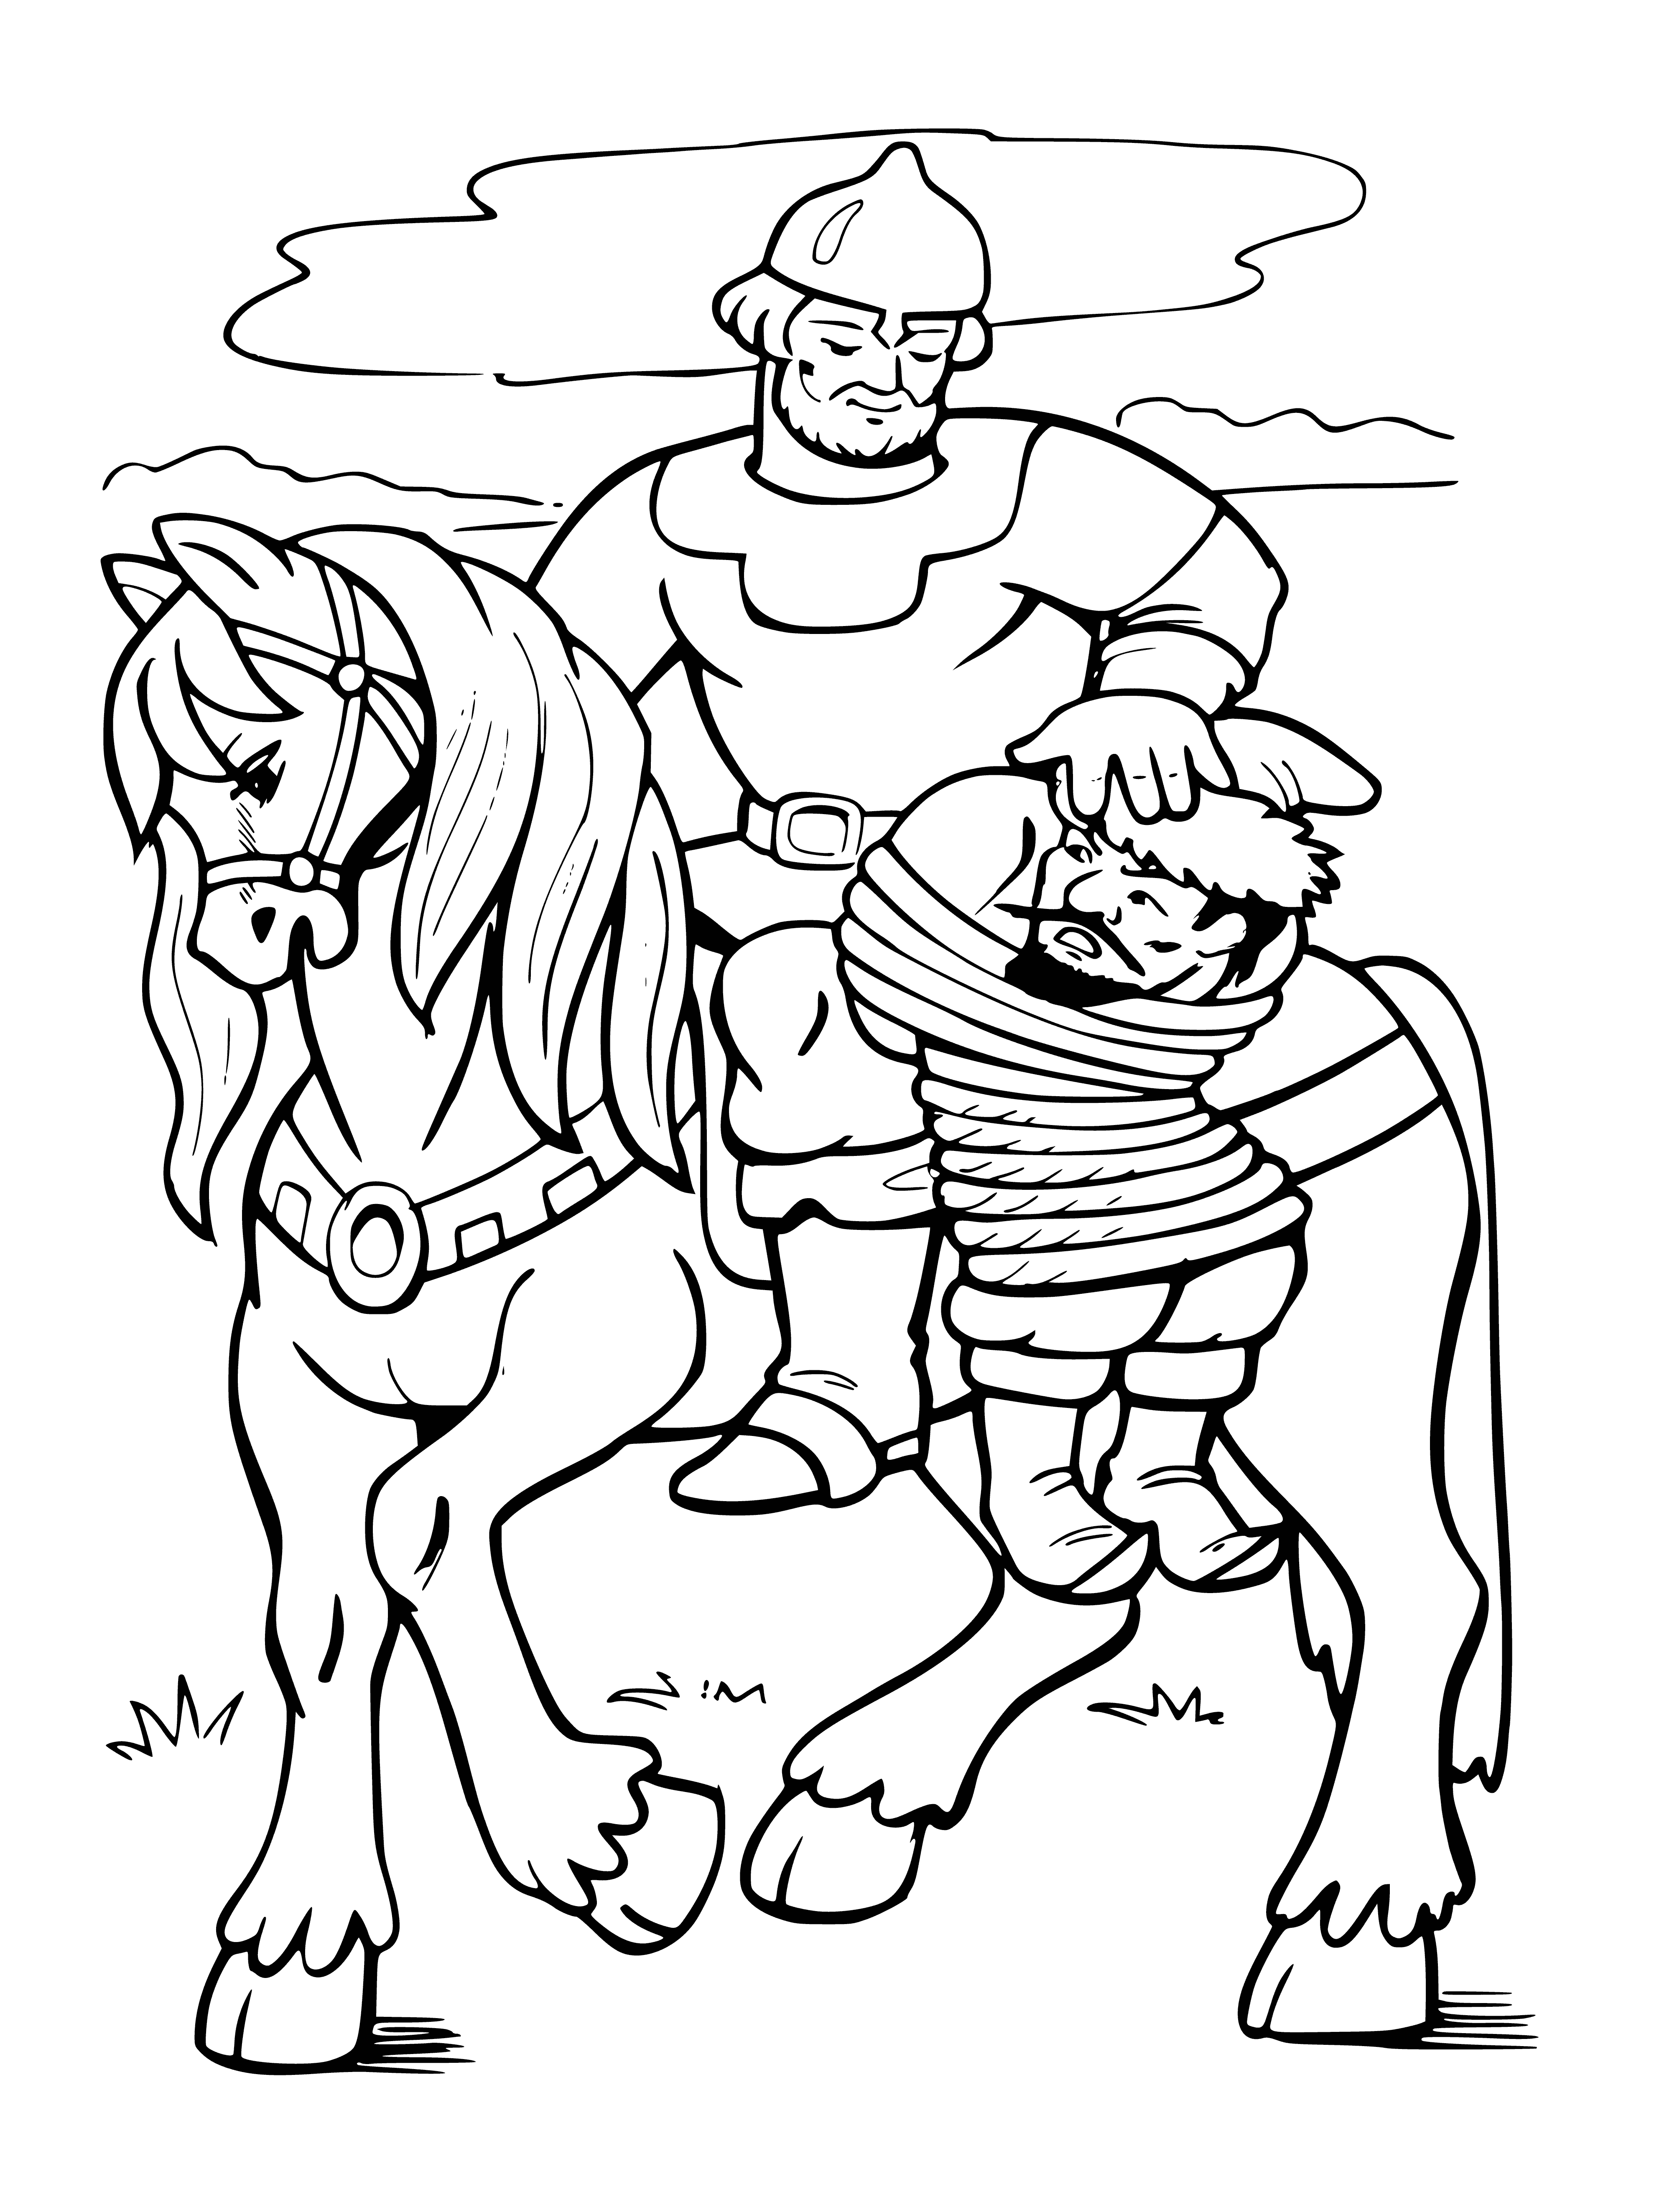 Tied to the saddle coloring page